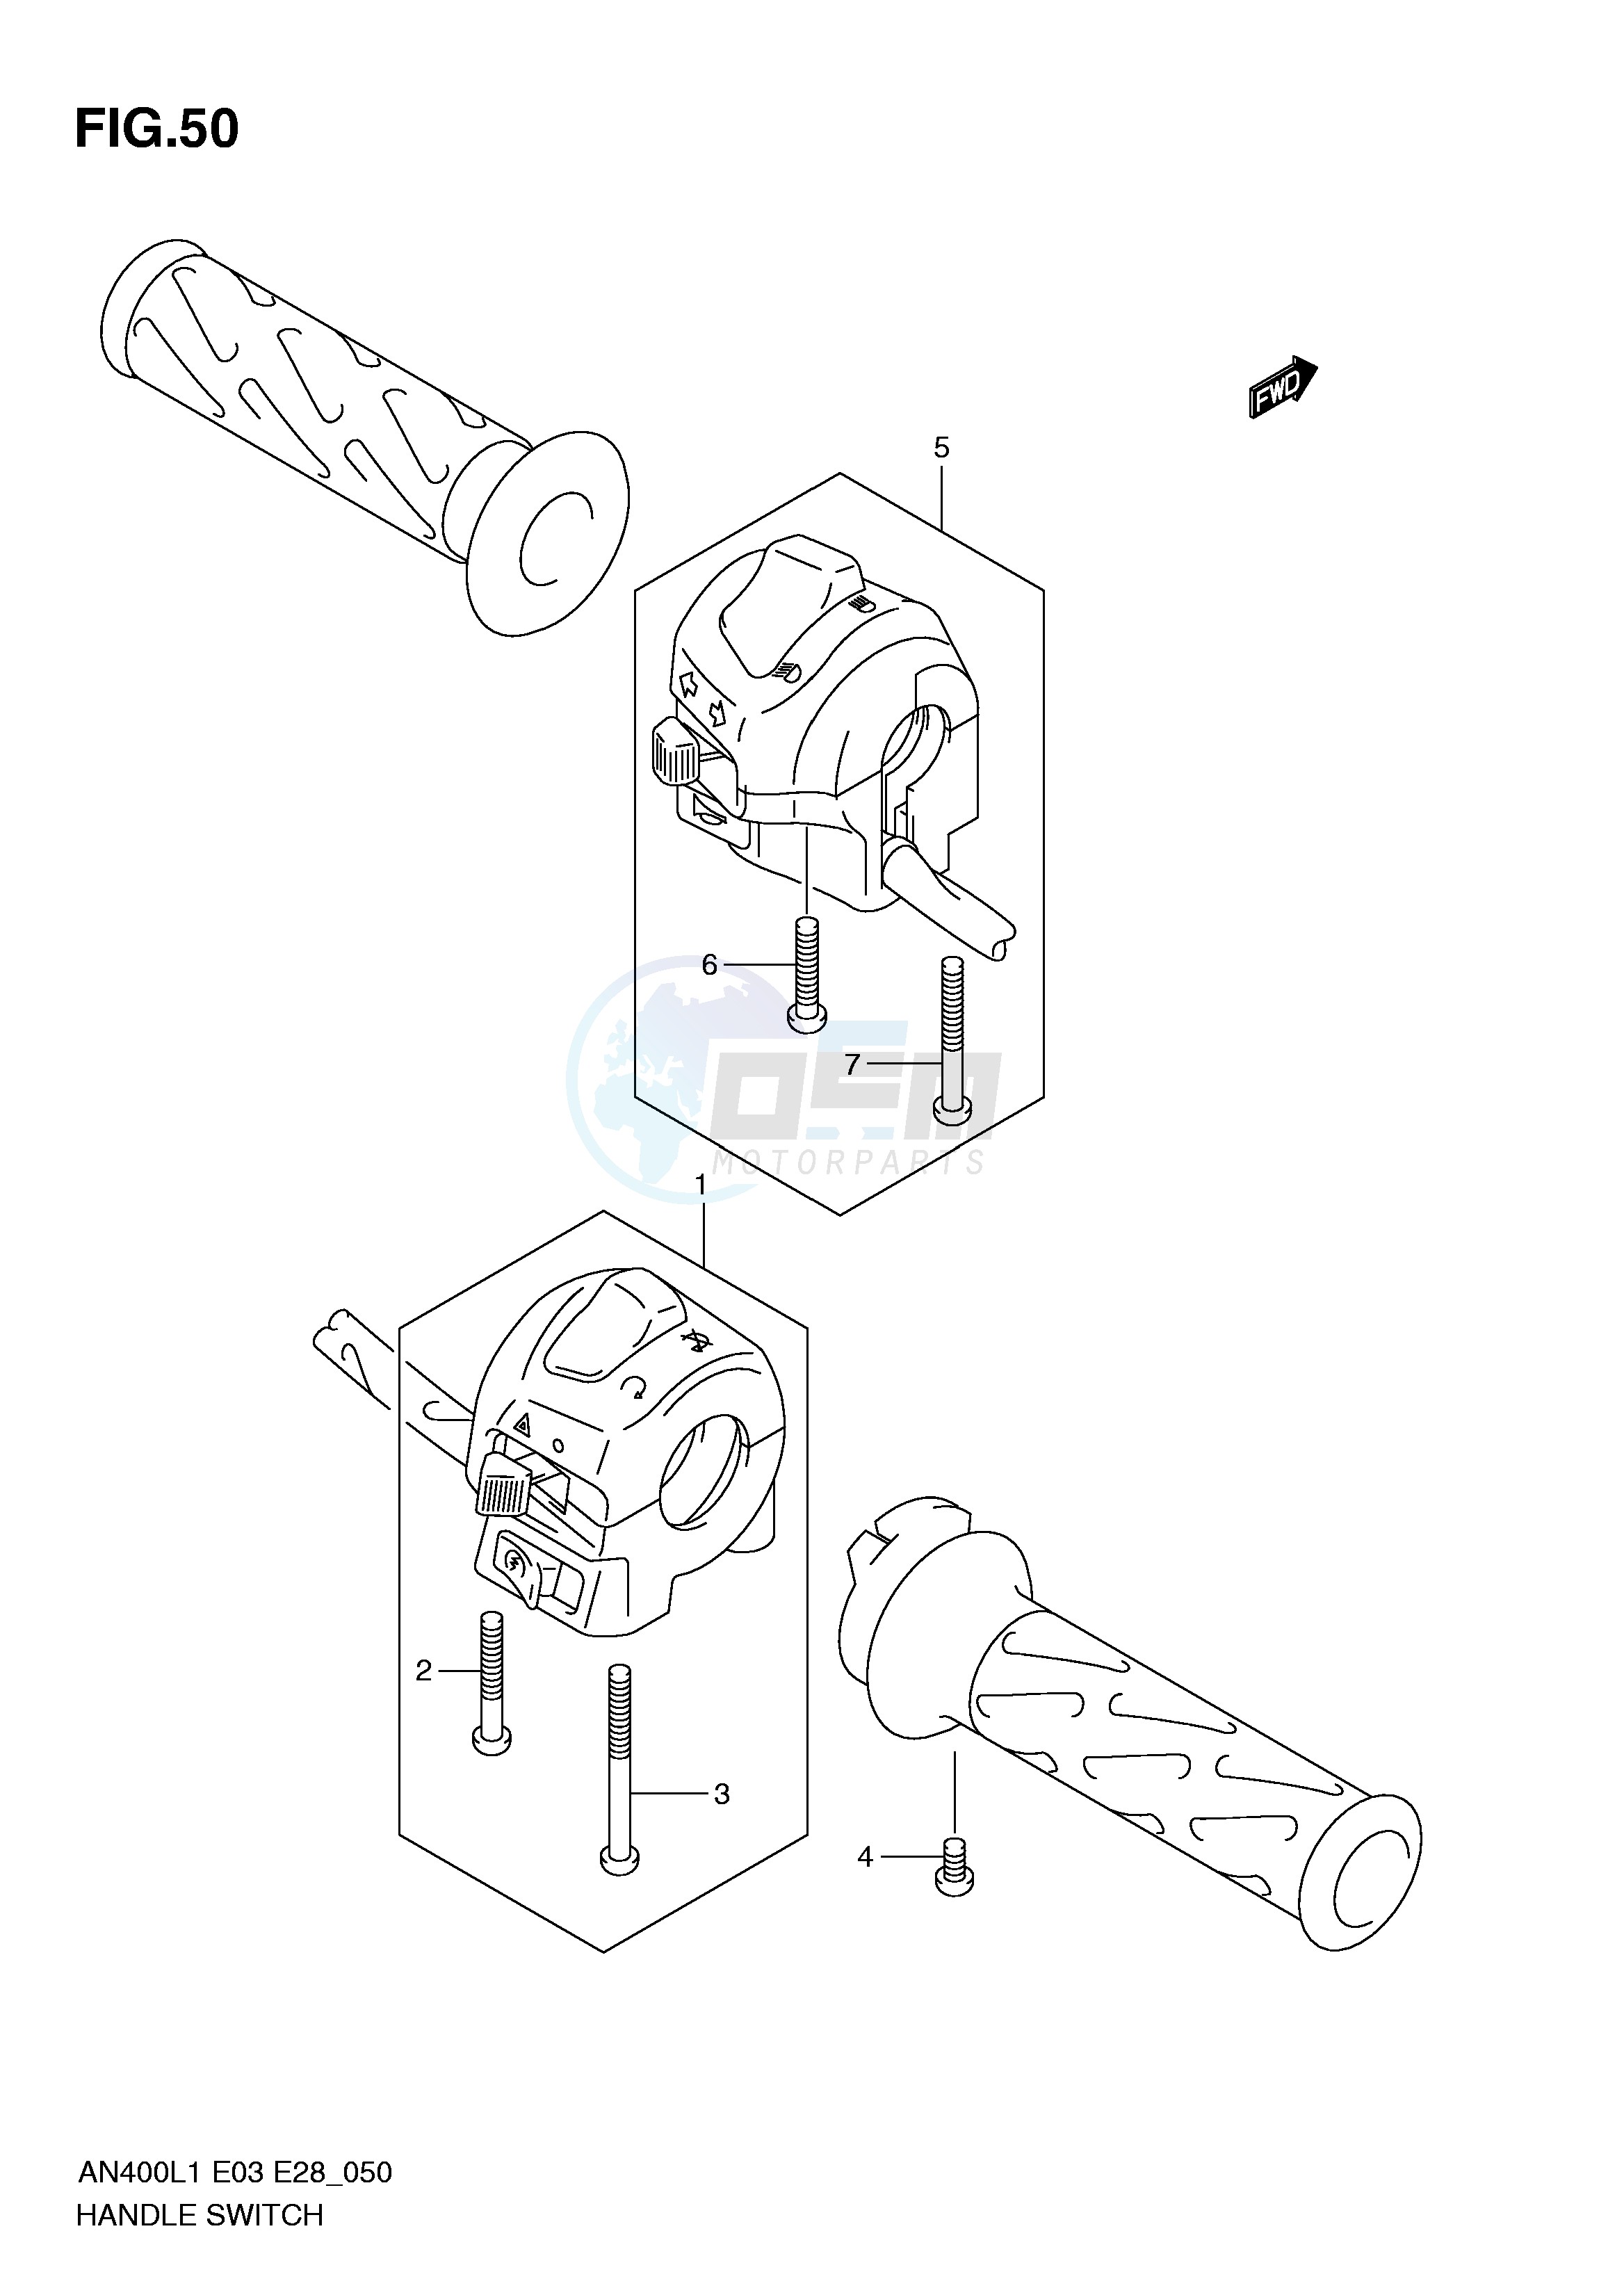 HANDLE SWITCH (AN400L1 E3) image